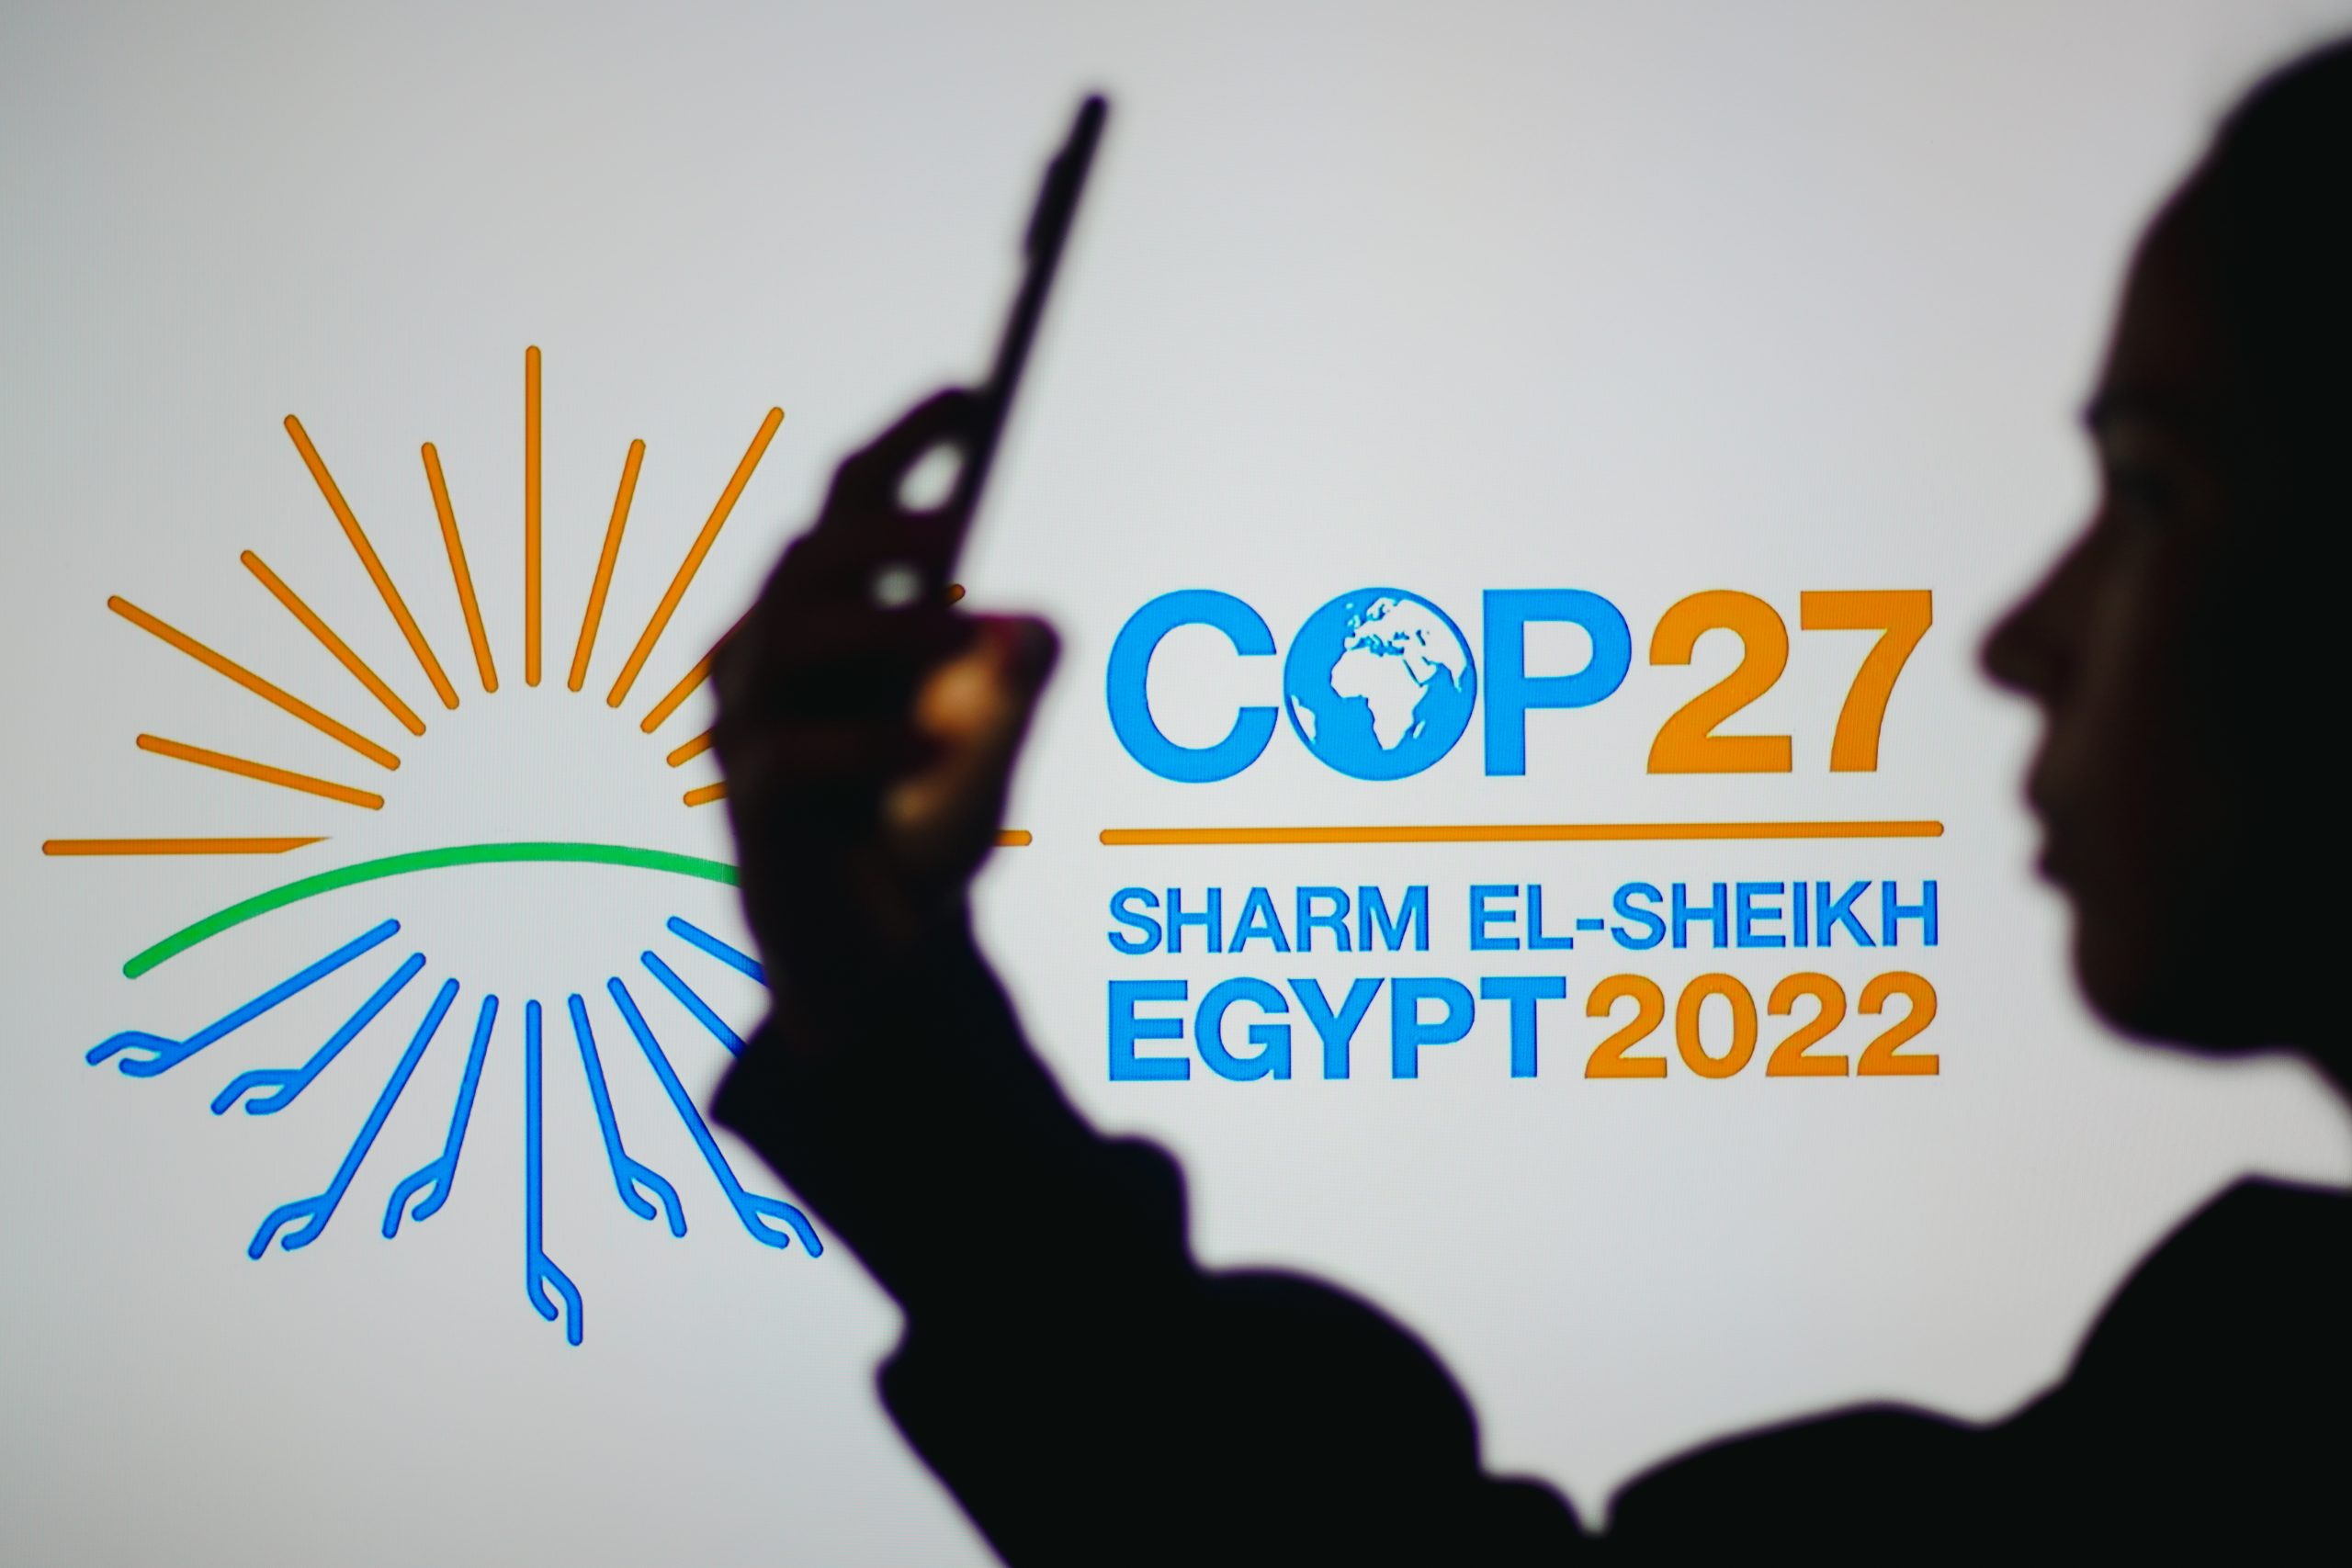 Egypt is hosting COP27. What are the expectations?